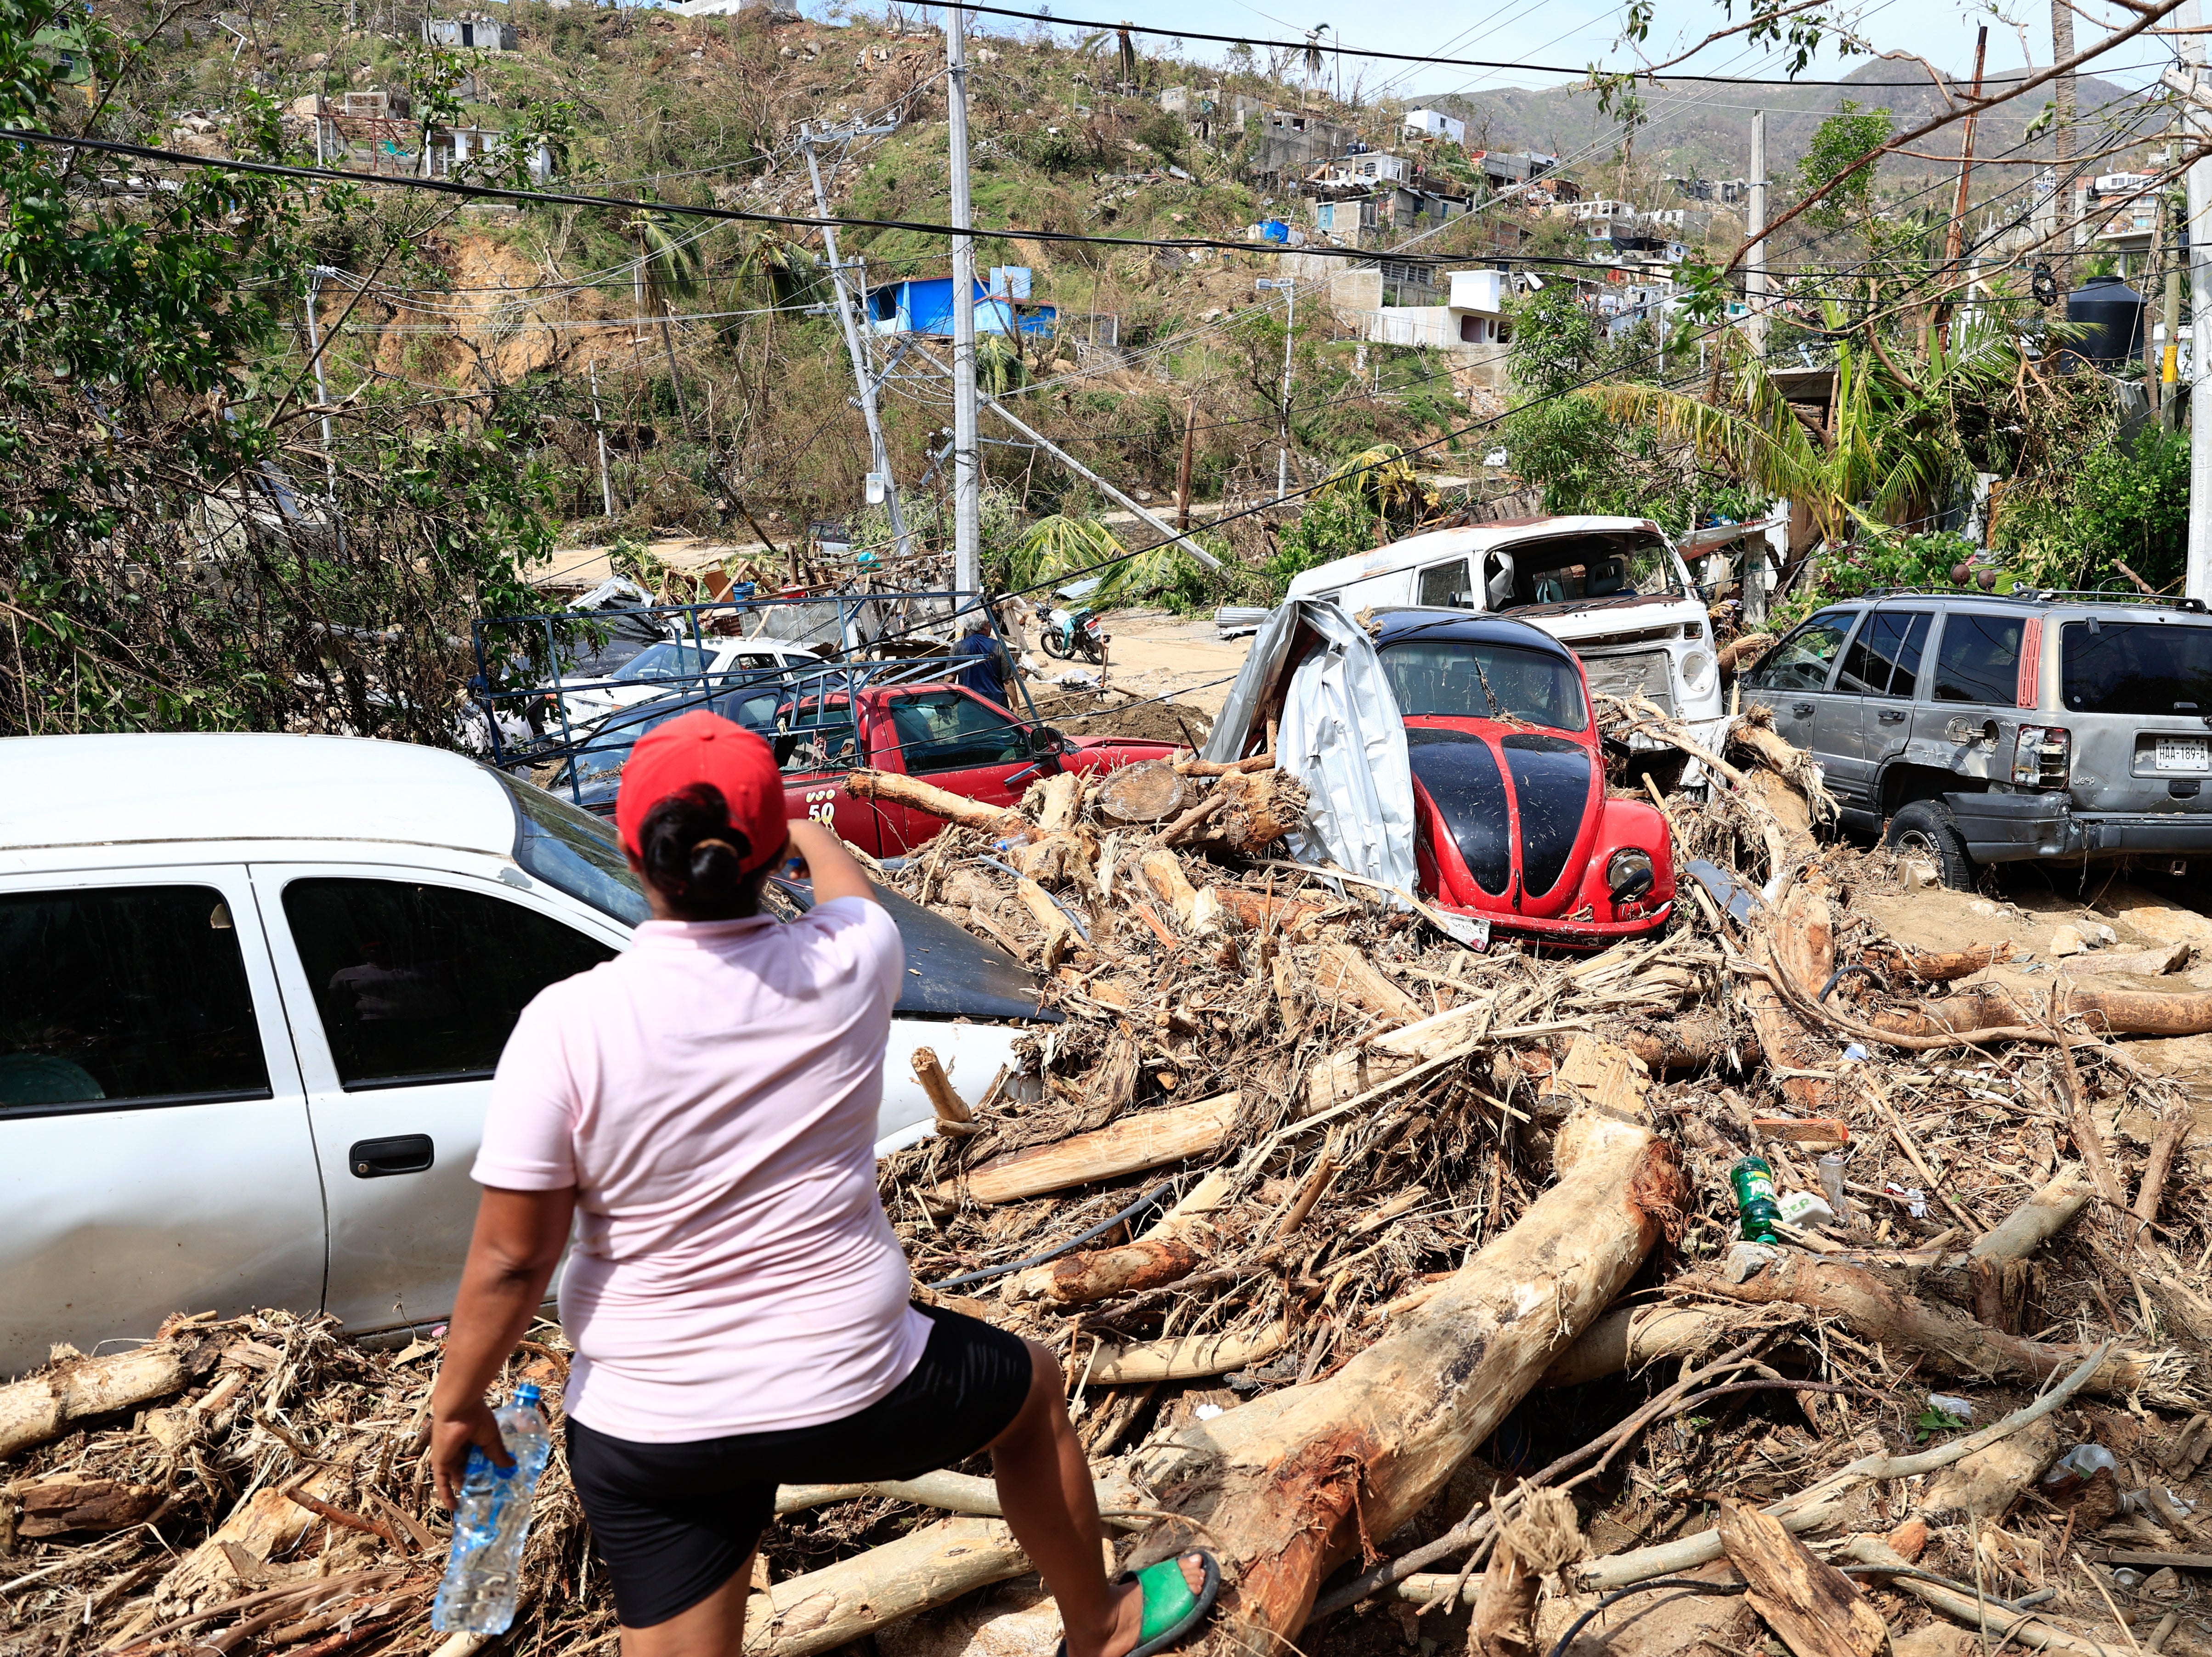 Damaged vehicles and downed trees in Acapulco after Hurricane Otis slammed into the coastal city last week